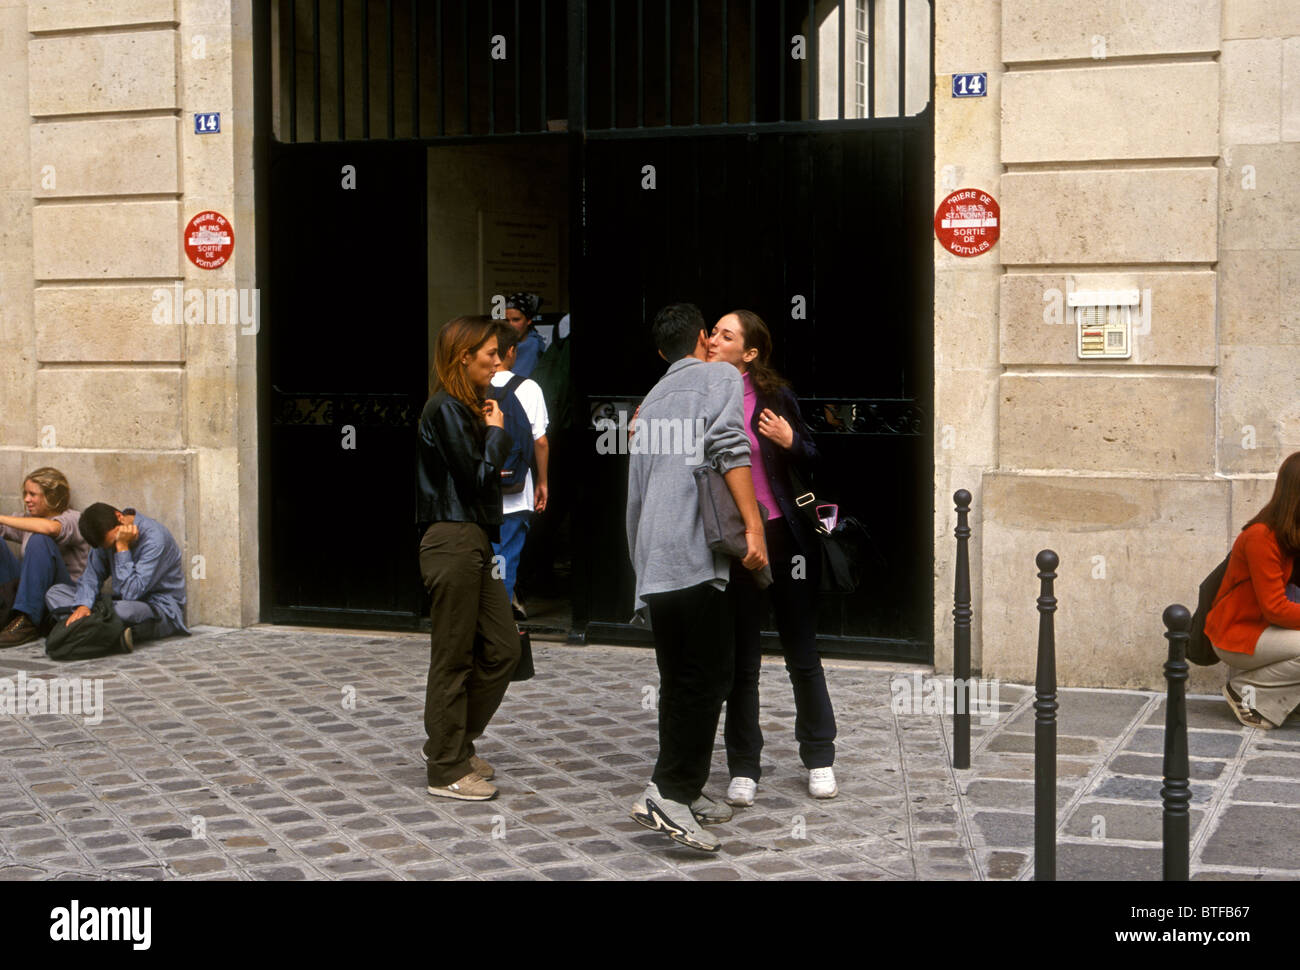 French students, French teens, French teenagers, greeting, kiss on cheek, kissing on cheek, Lycee Charlemagne, Marais District, Paris, France, Europe Stock Photo